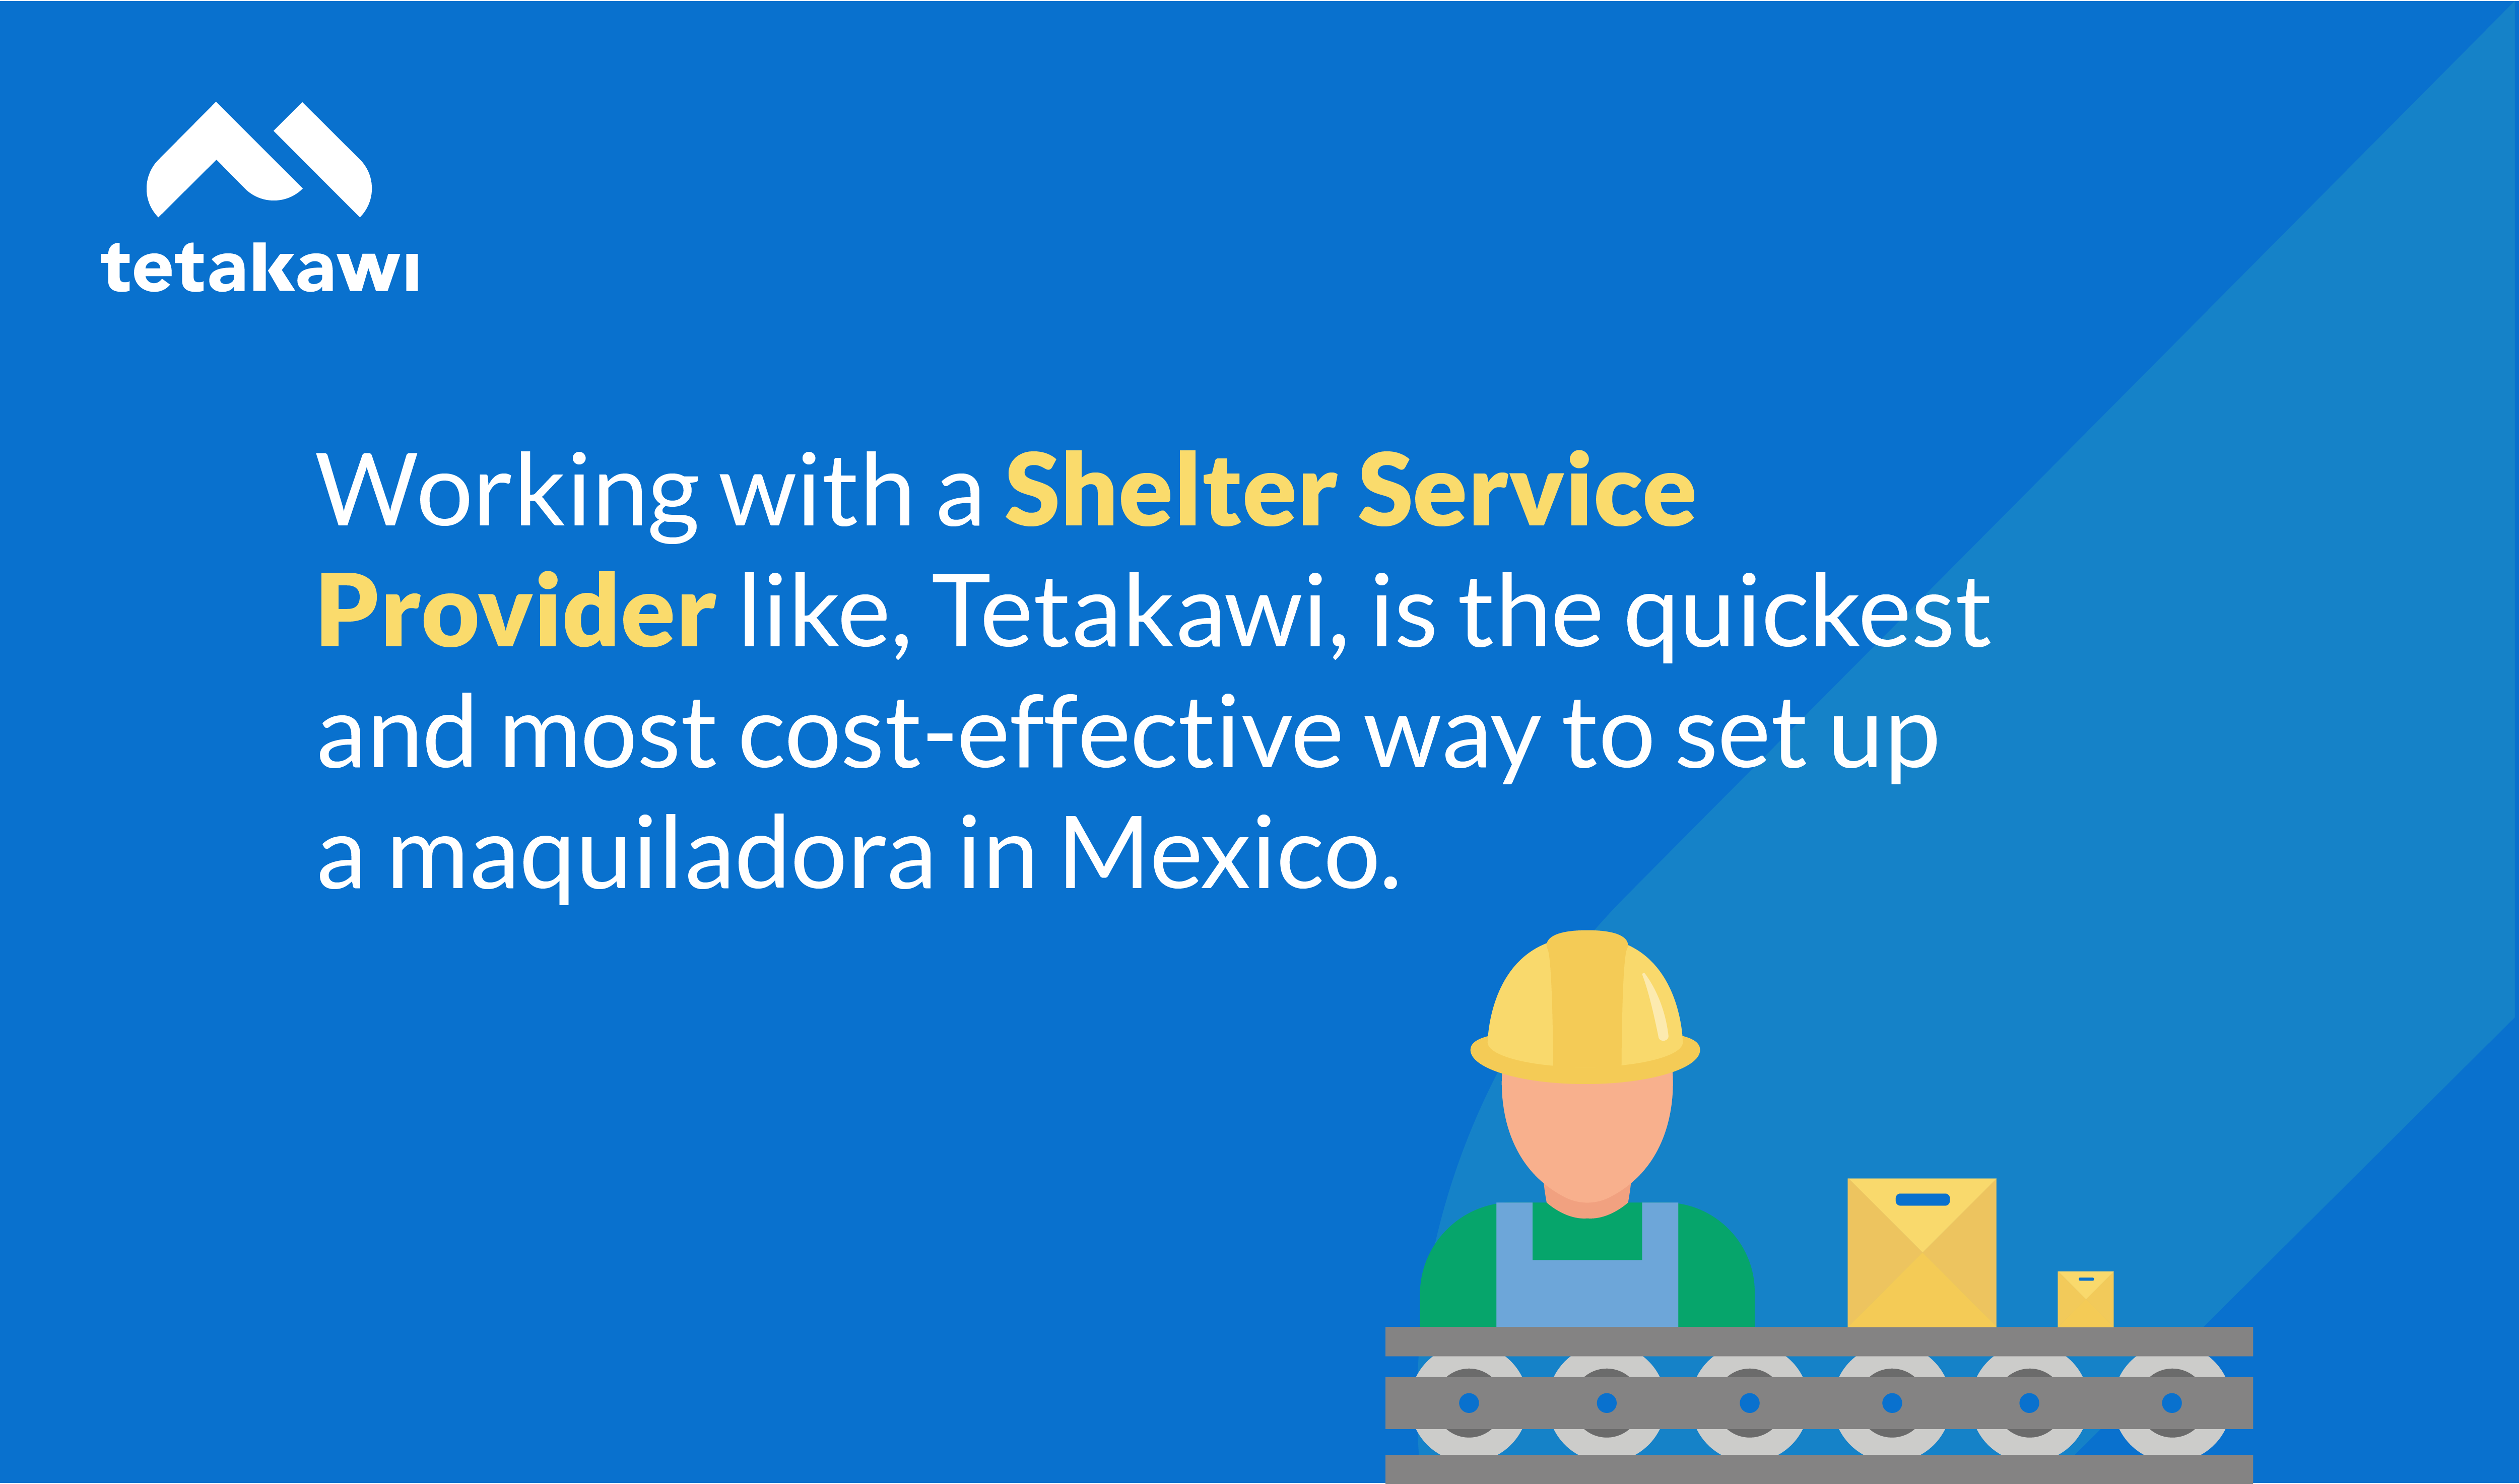 Working with a shelter company is the quickest way to access IMMEX benefits